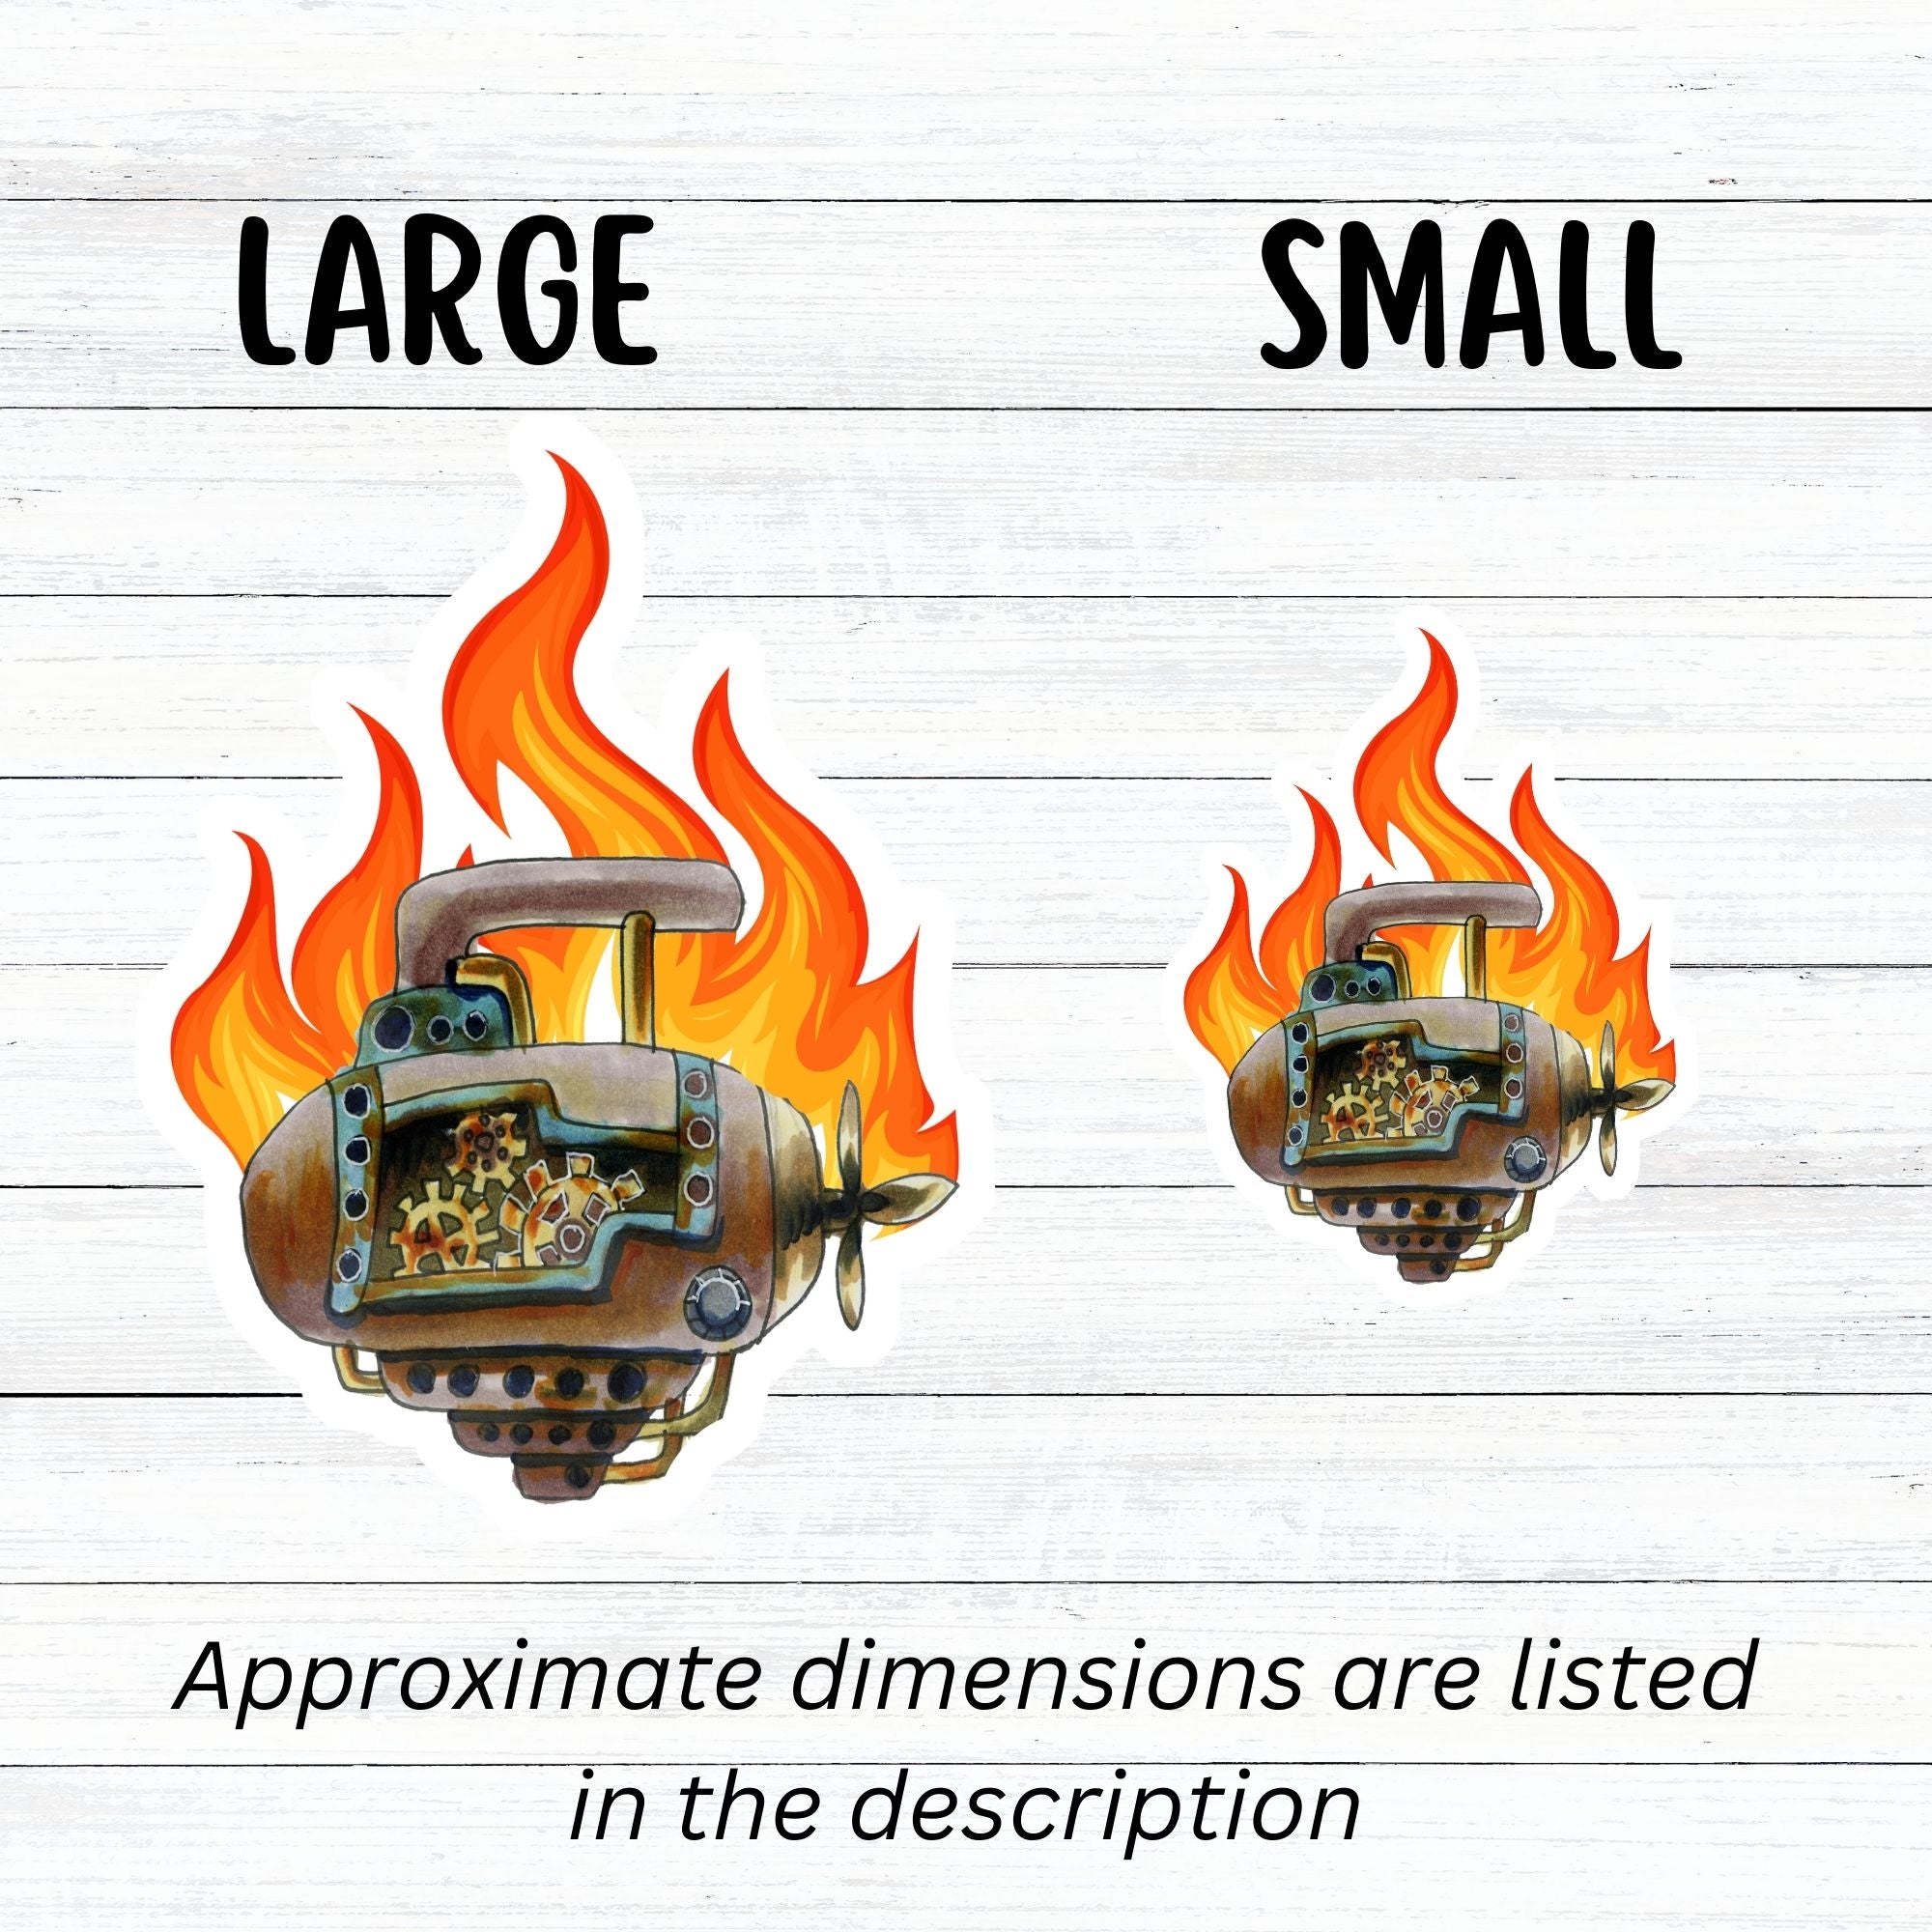 This individual die-cut steampunk sticker features a brown engine with a cutaway to show the gears inside, on a background of yellow, orange, and red flames. This image shows the large and small steampunk engine stickers side by side.